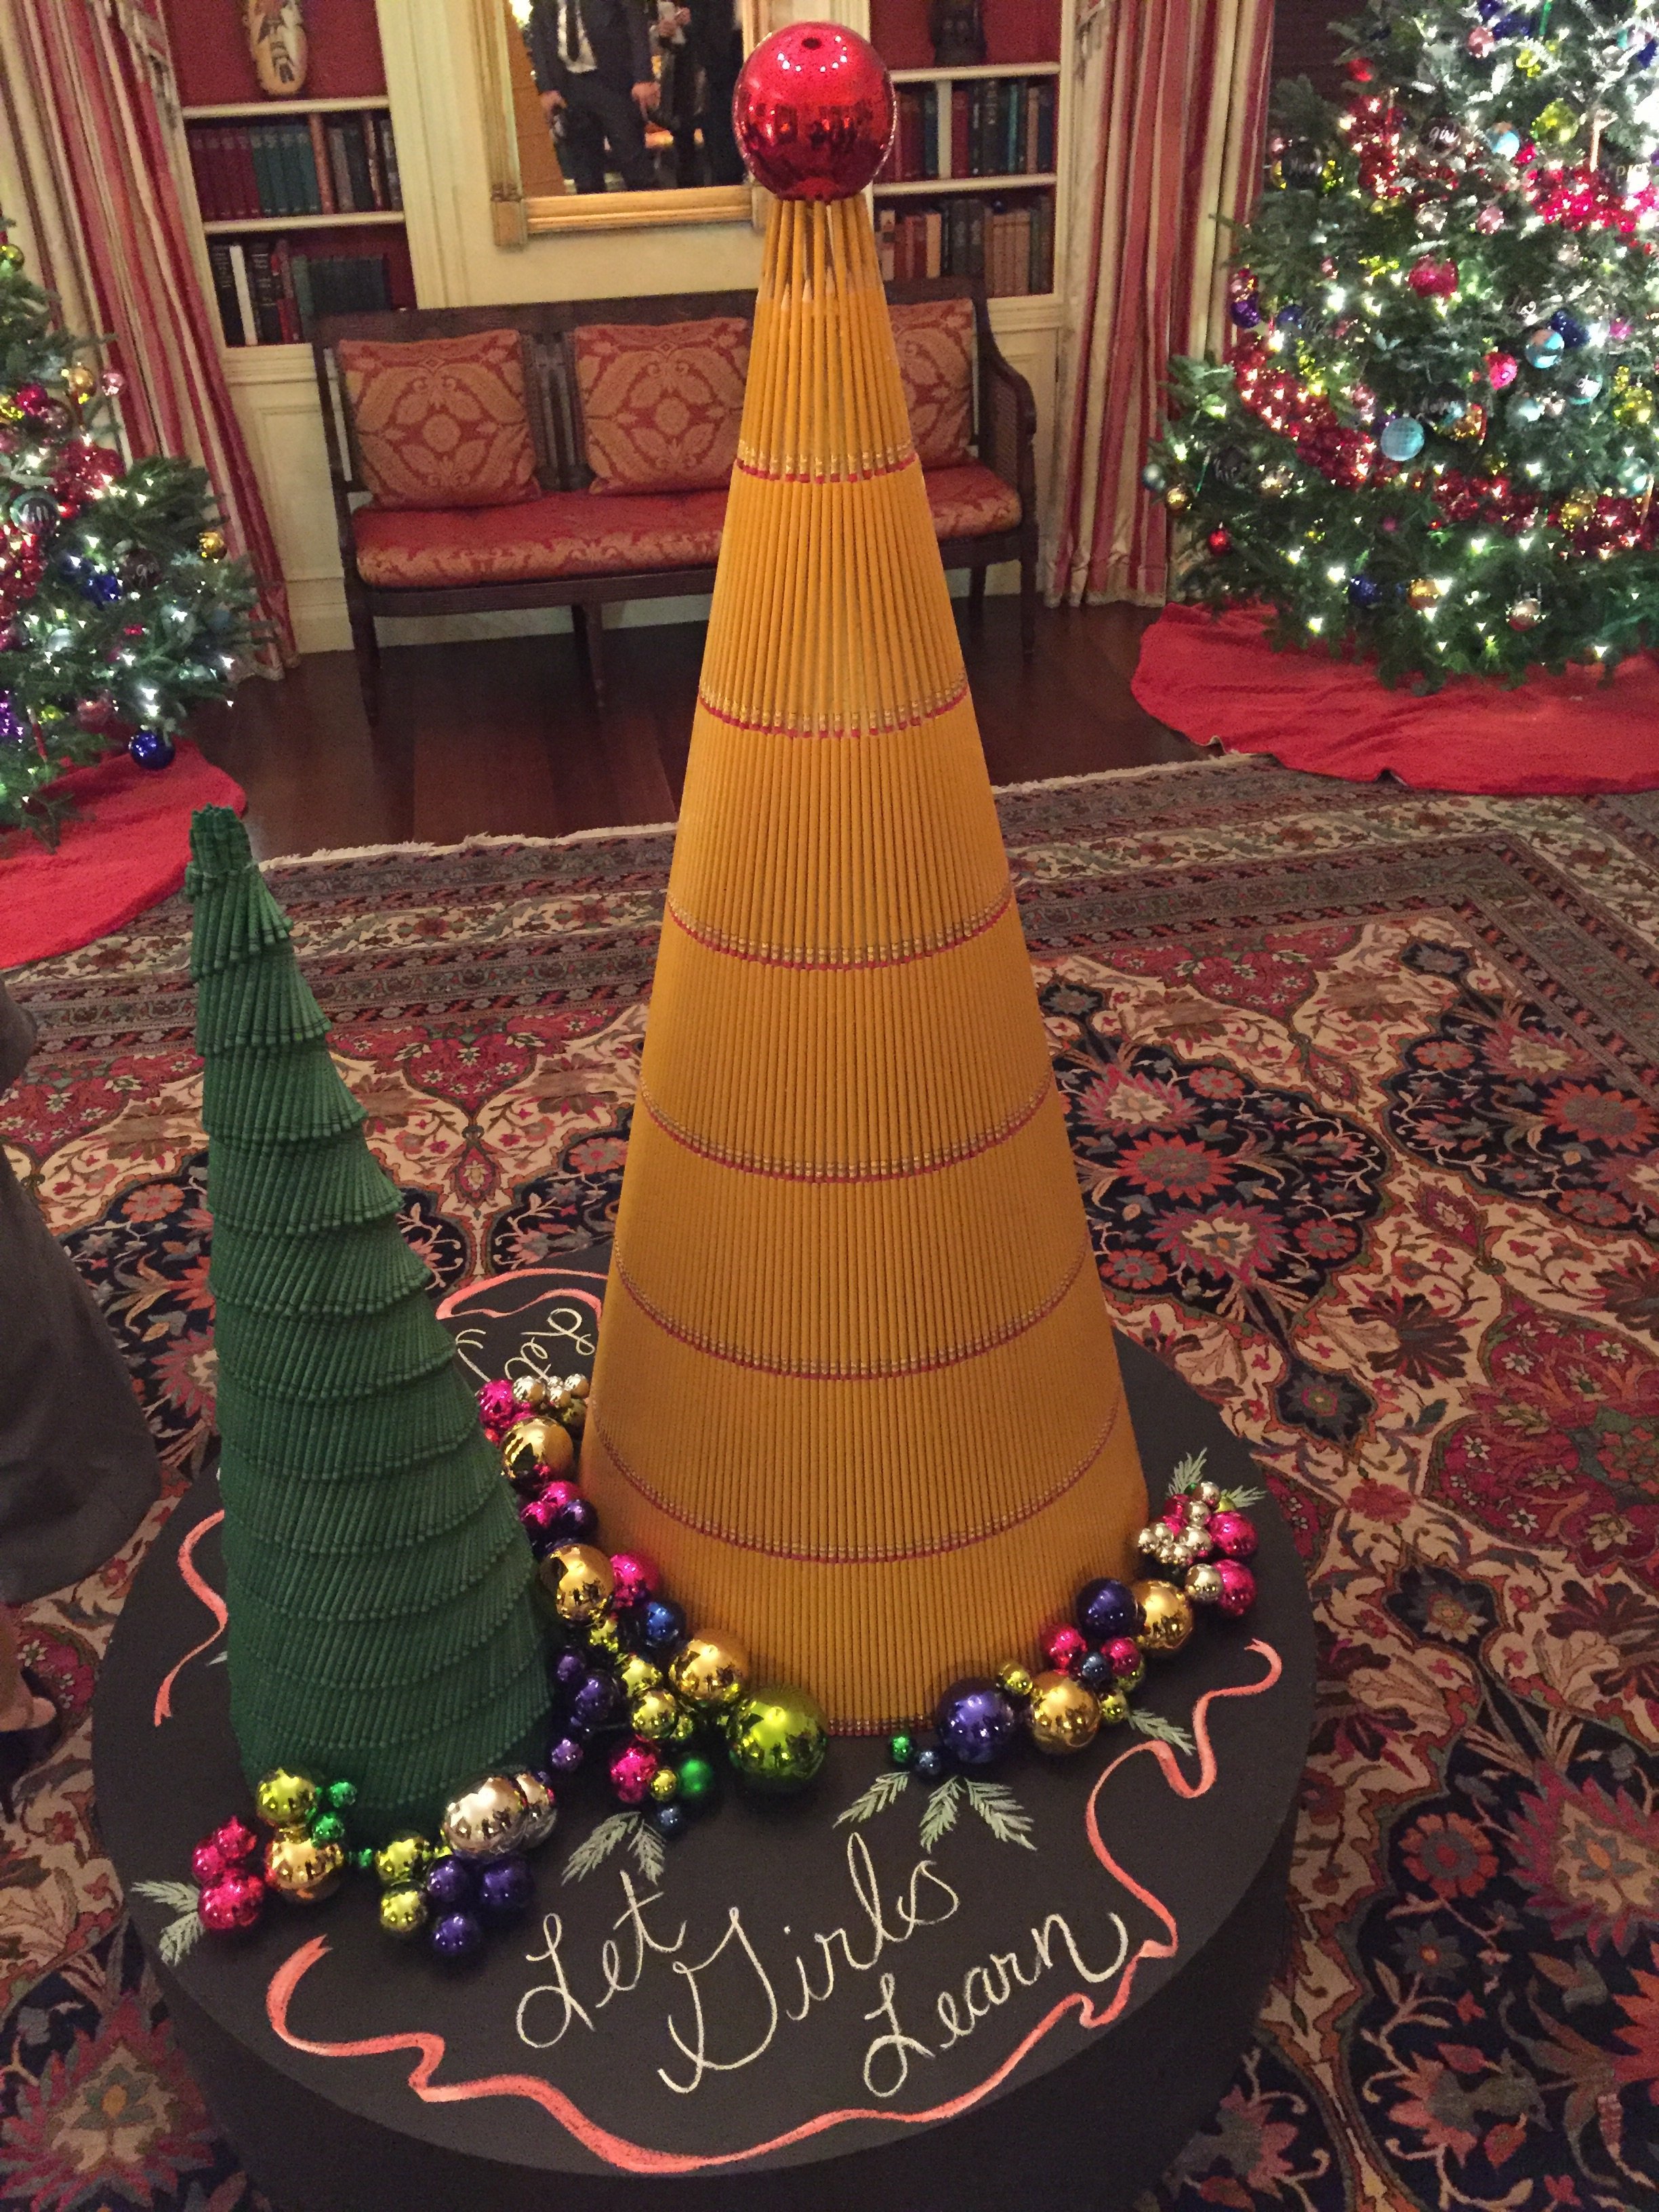 The Gift of Education represented by green and yellow pencils in the White House Library. Photo by Andrea Marks.